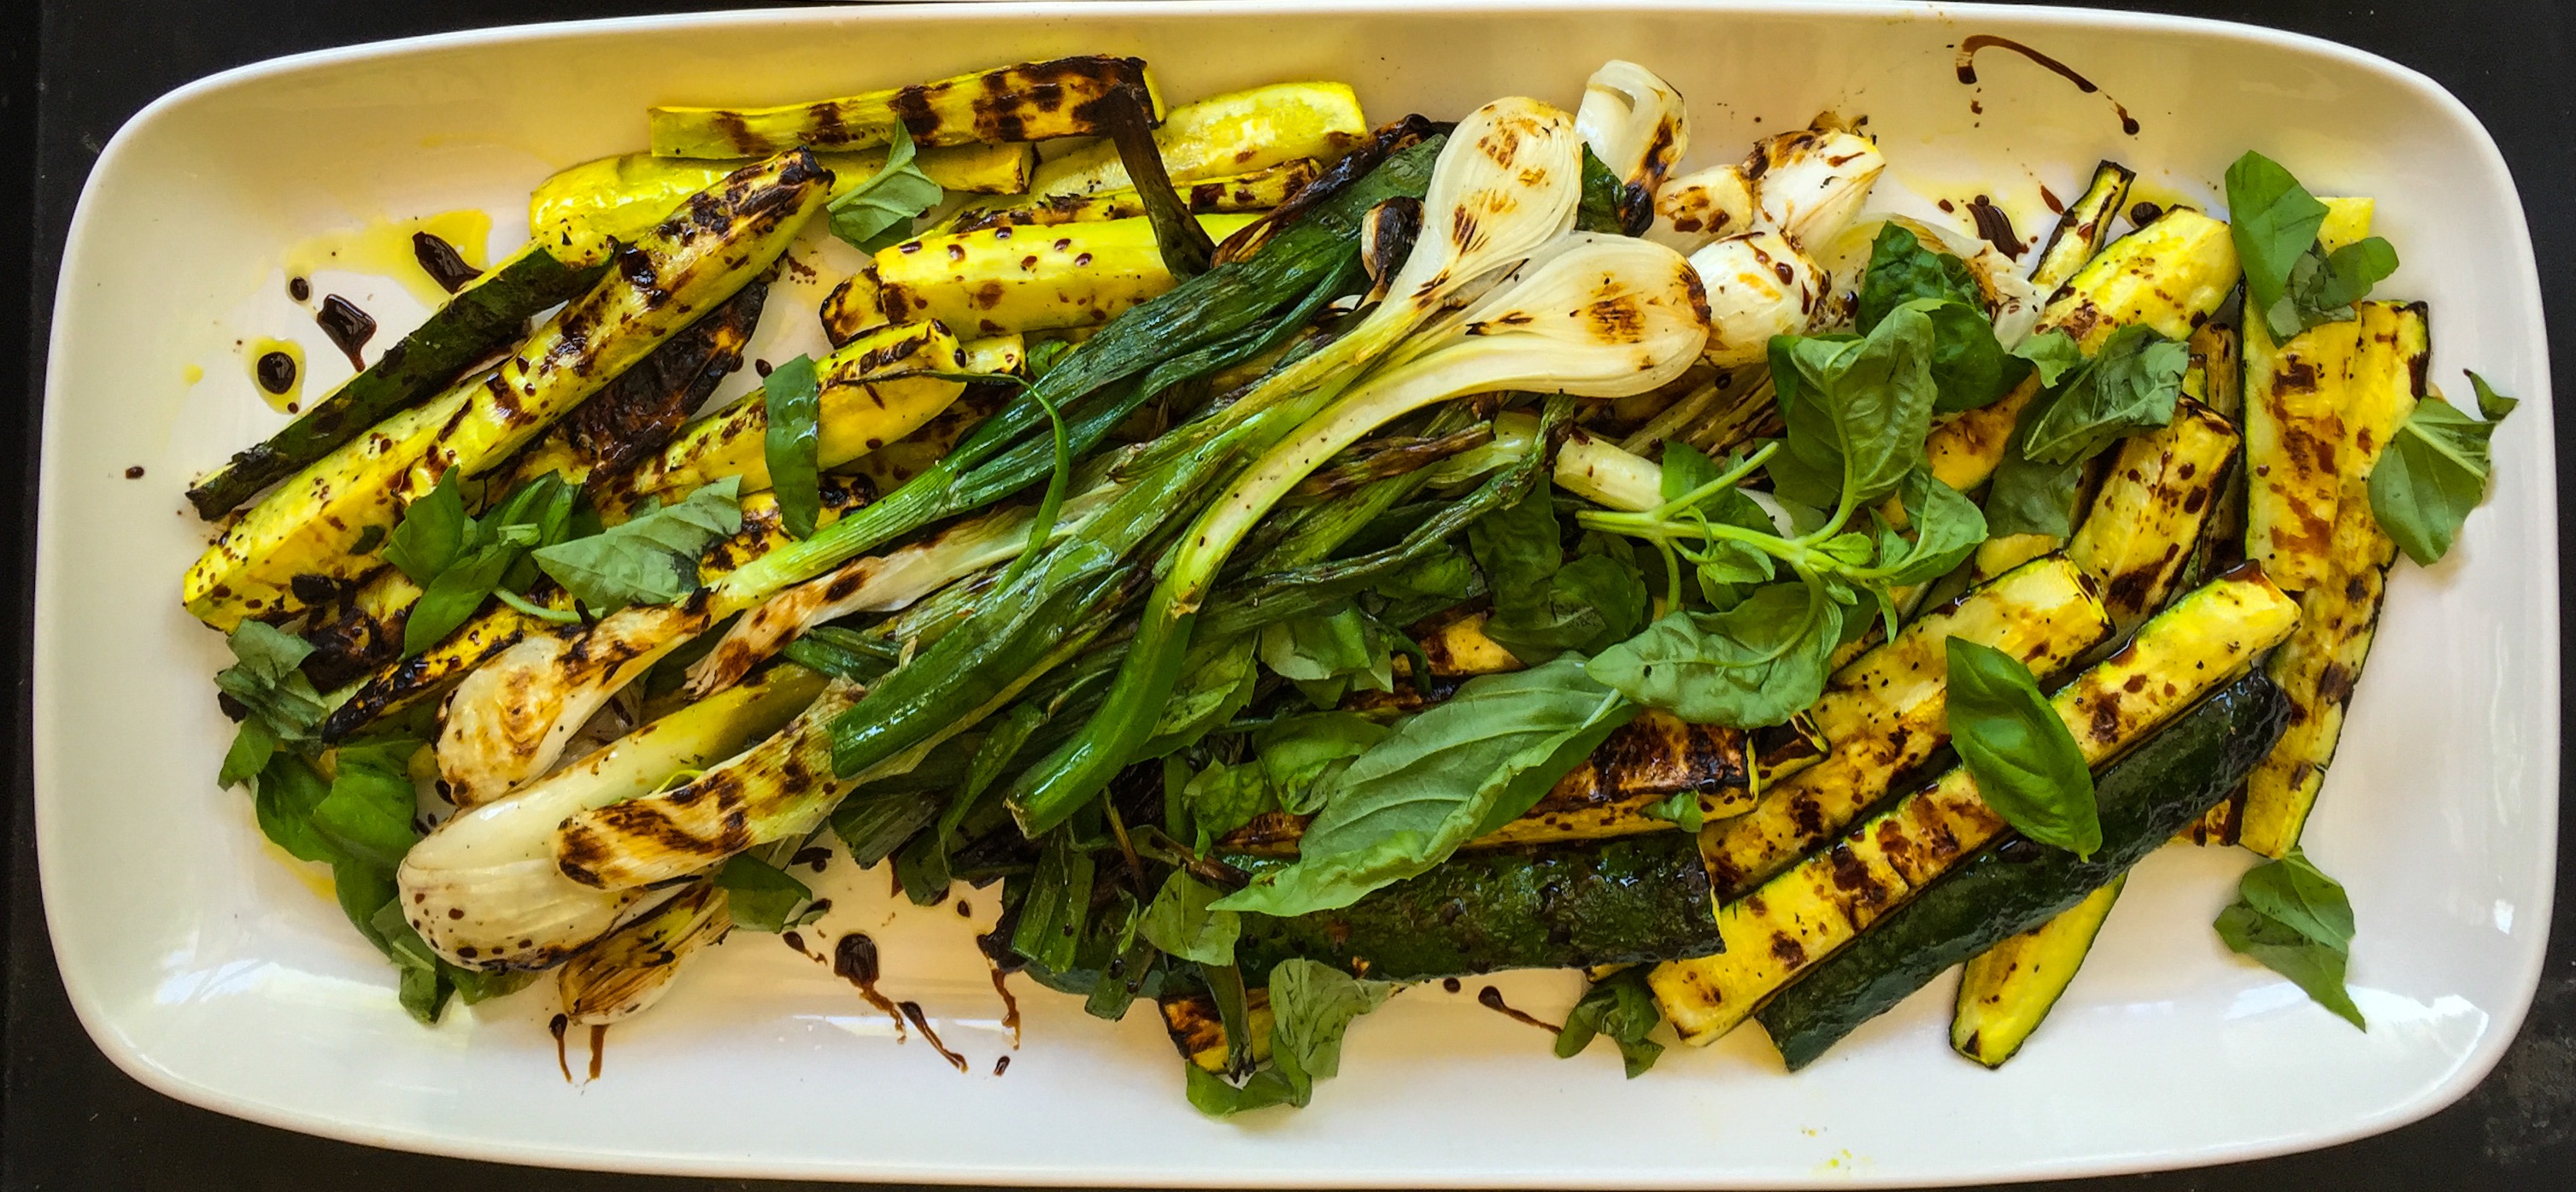 What a beautiful platter of fresh local grilled vegetables!